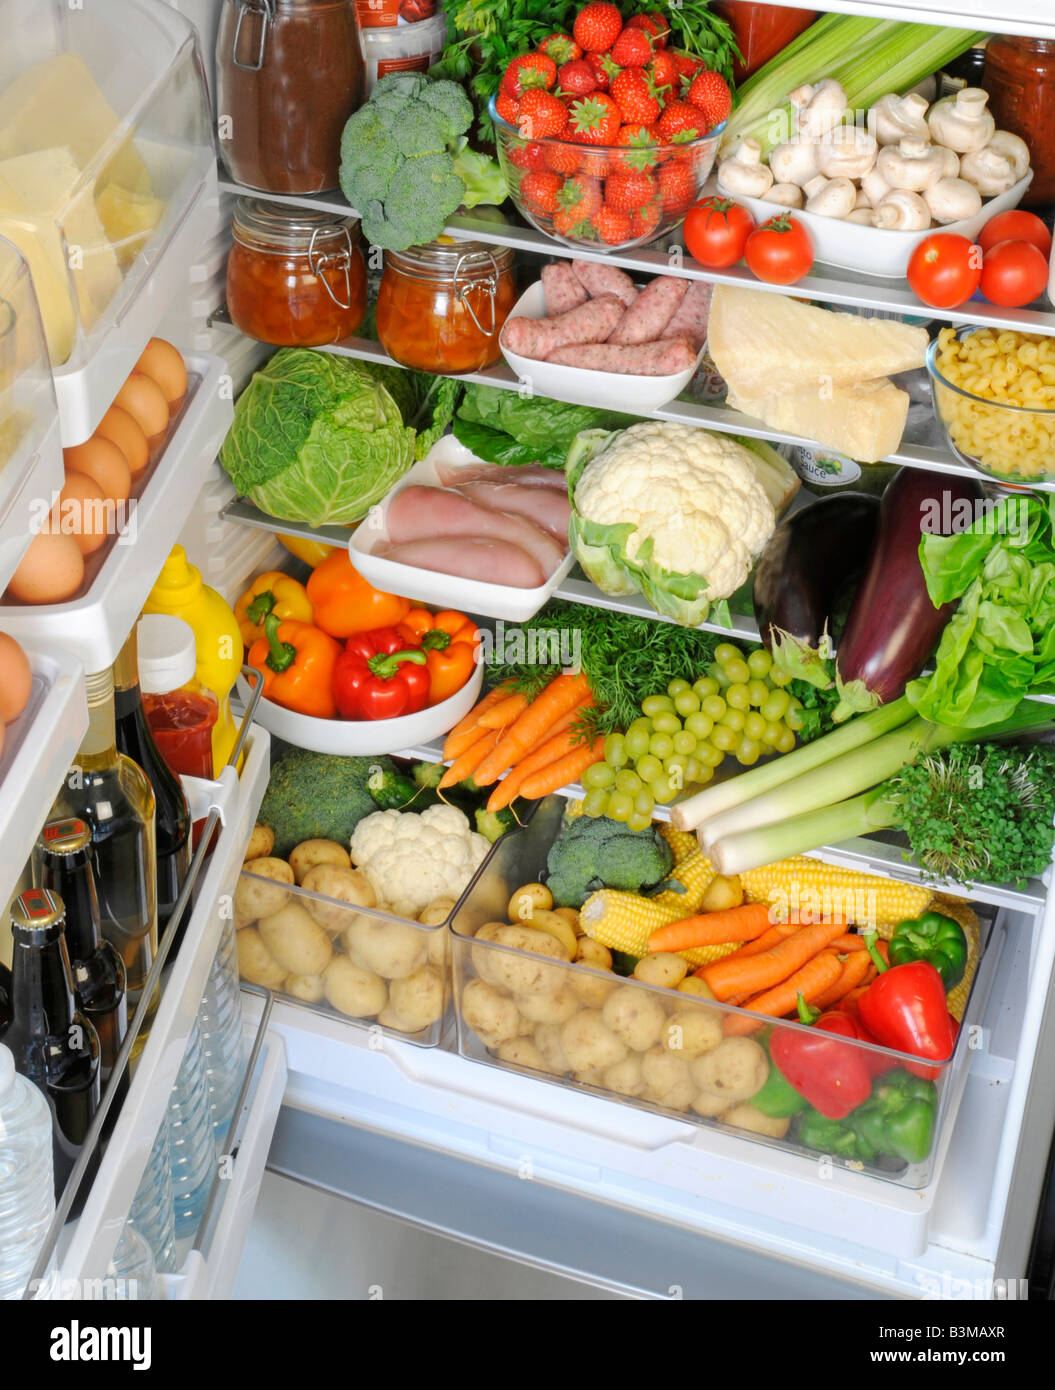 CONTENTS OF REFRIGERATOR Stock Photo